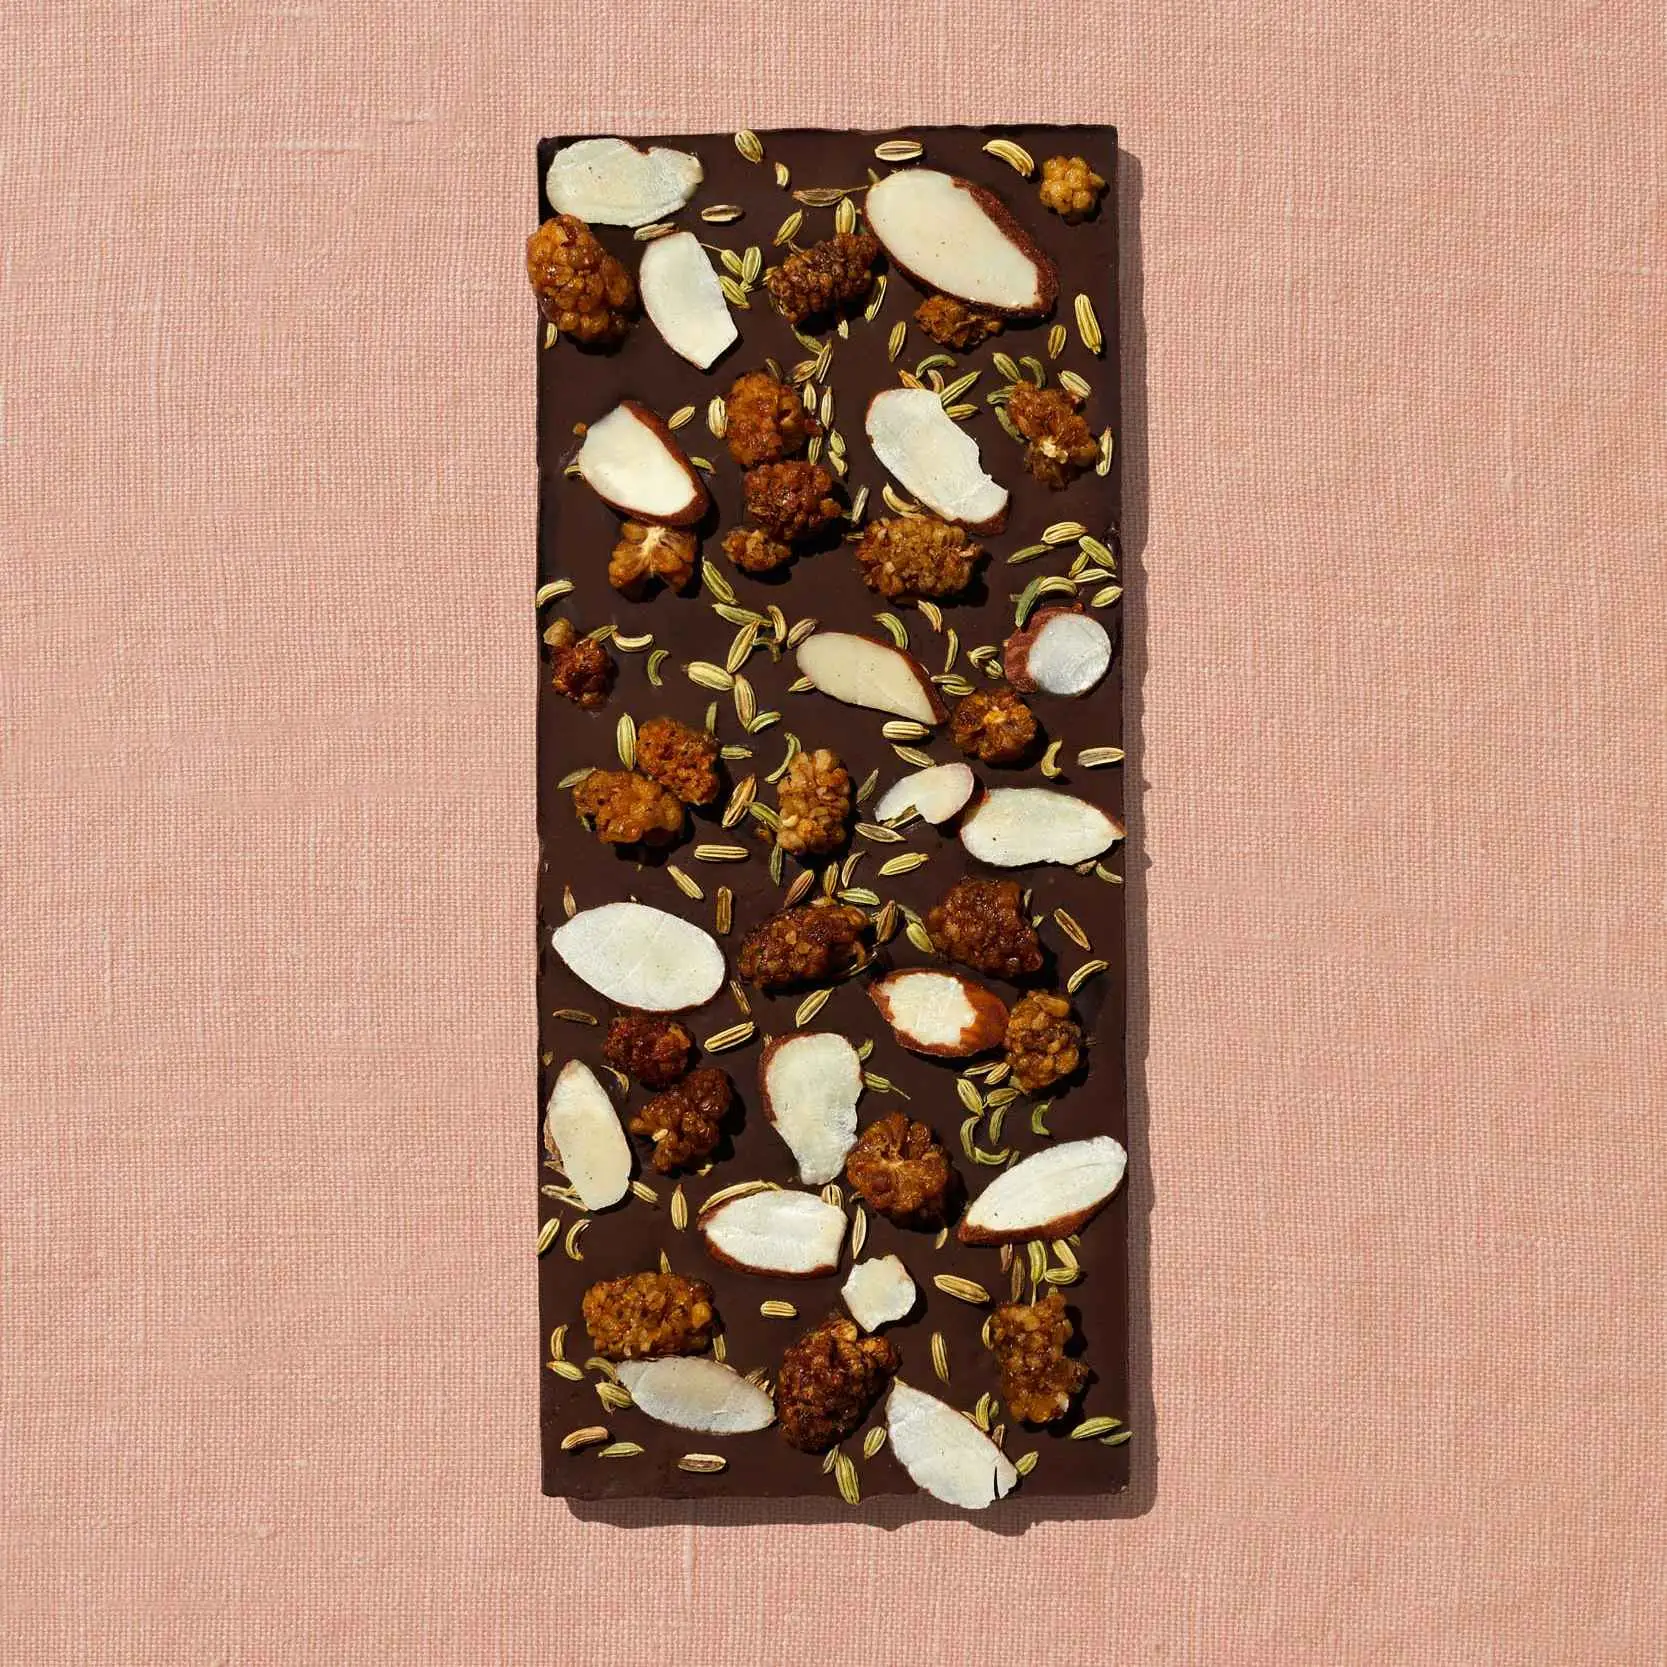 White Mulberry, Almond, Fennel Date-Sweetened Dark Chocolate Delivery